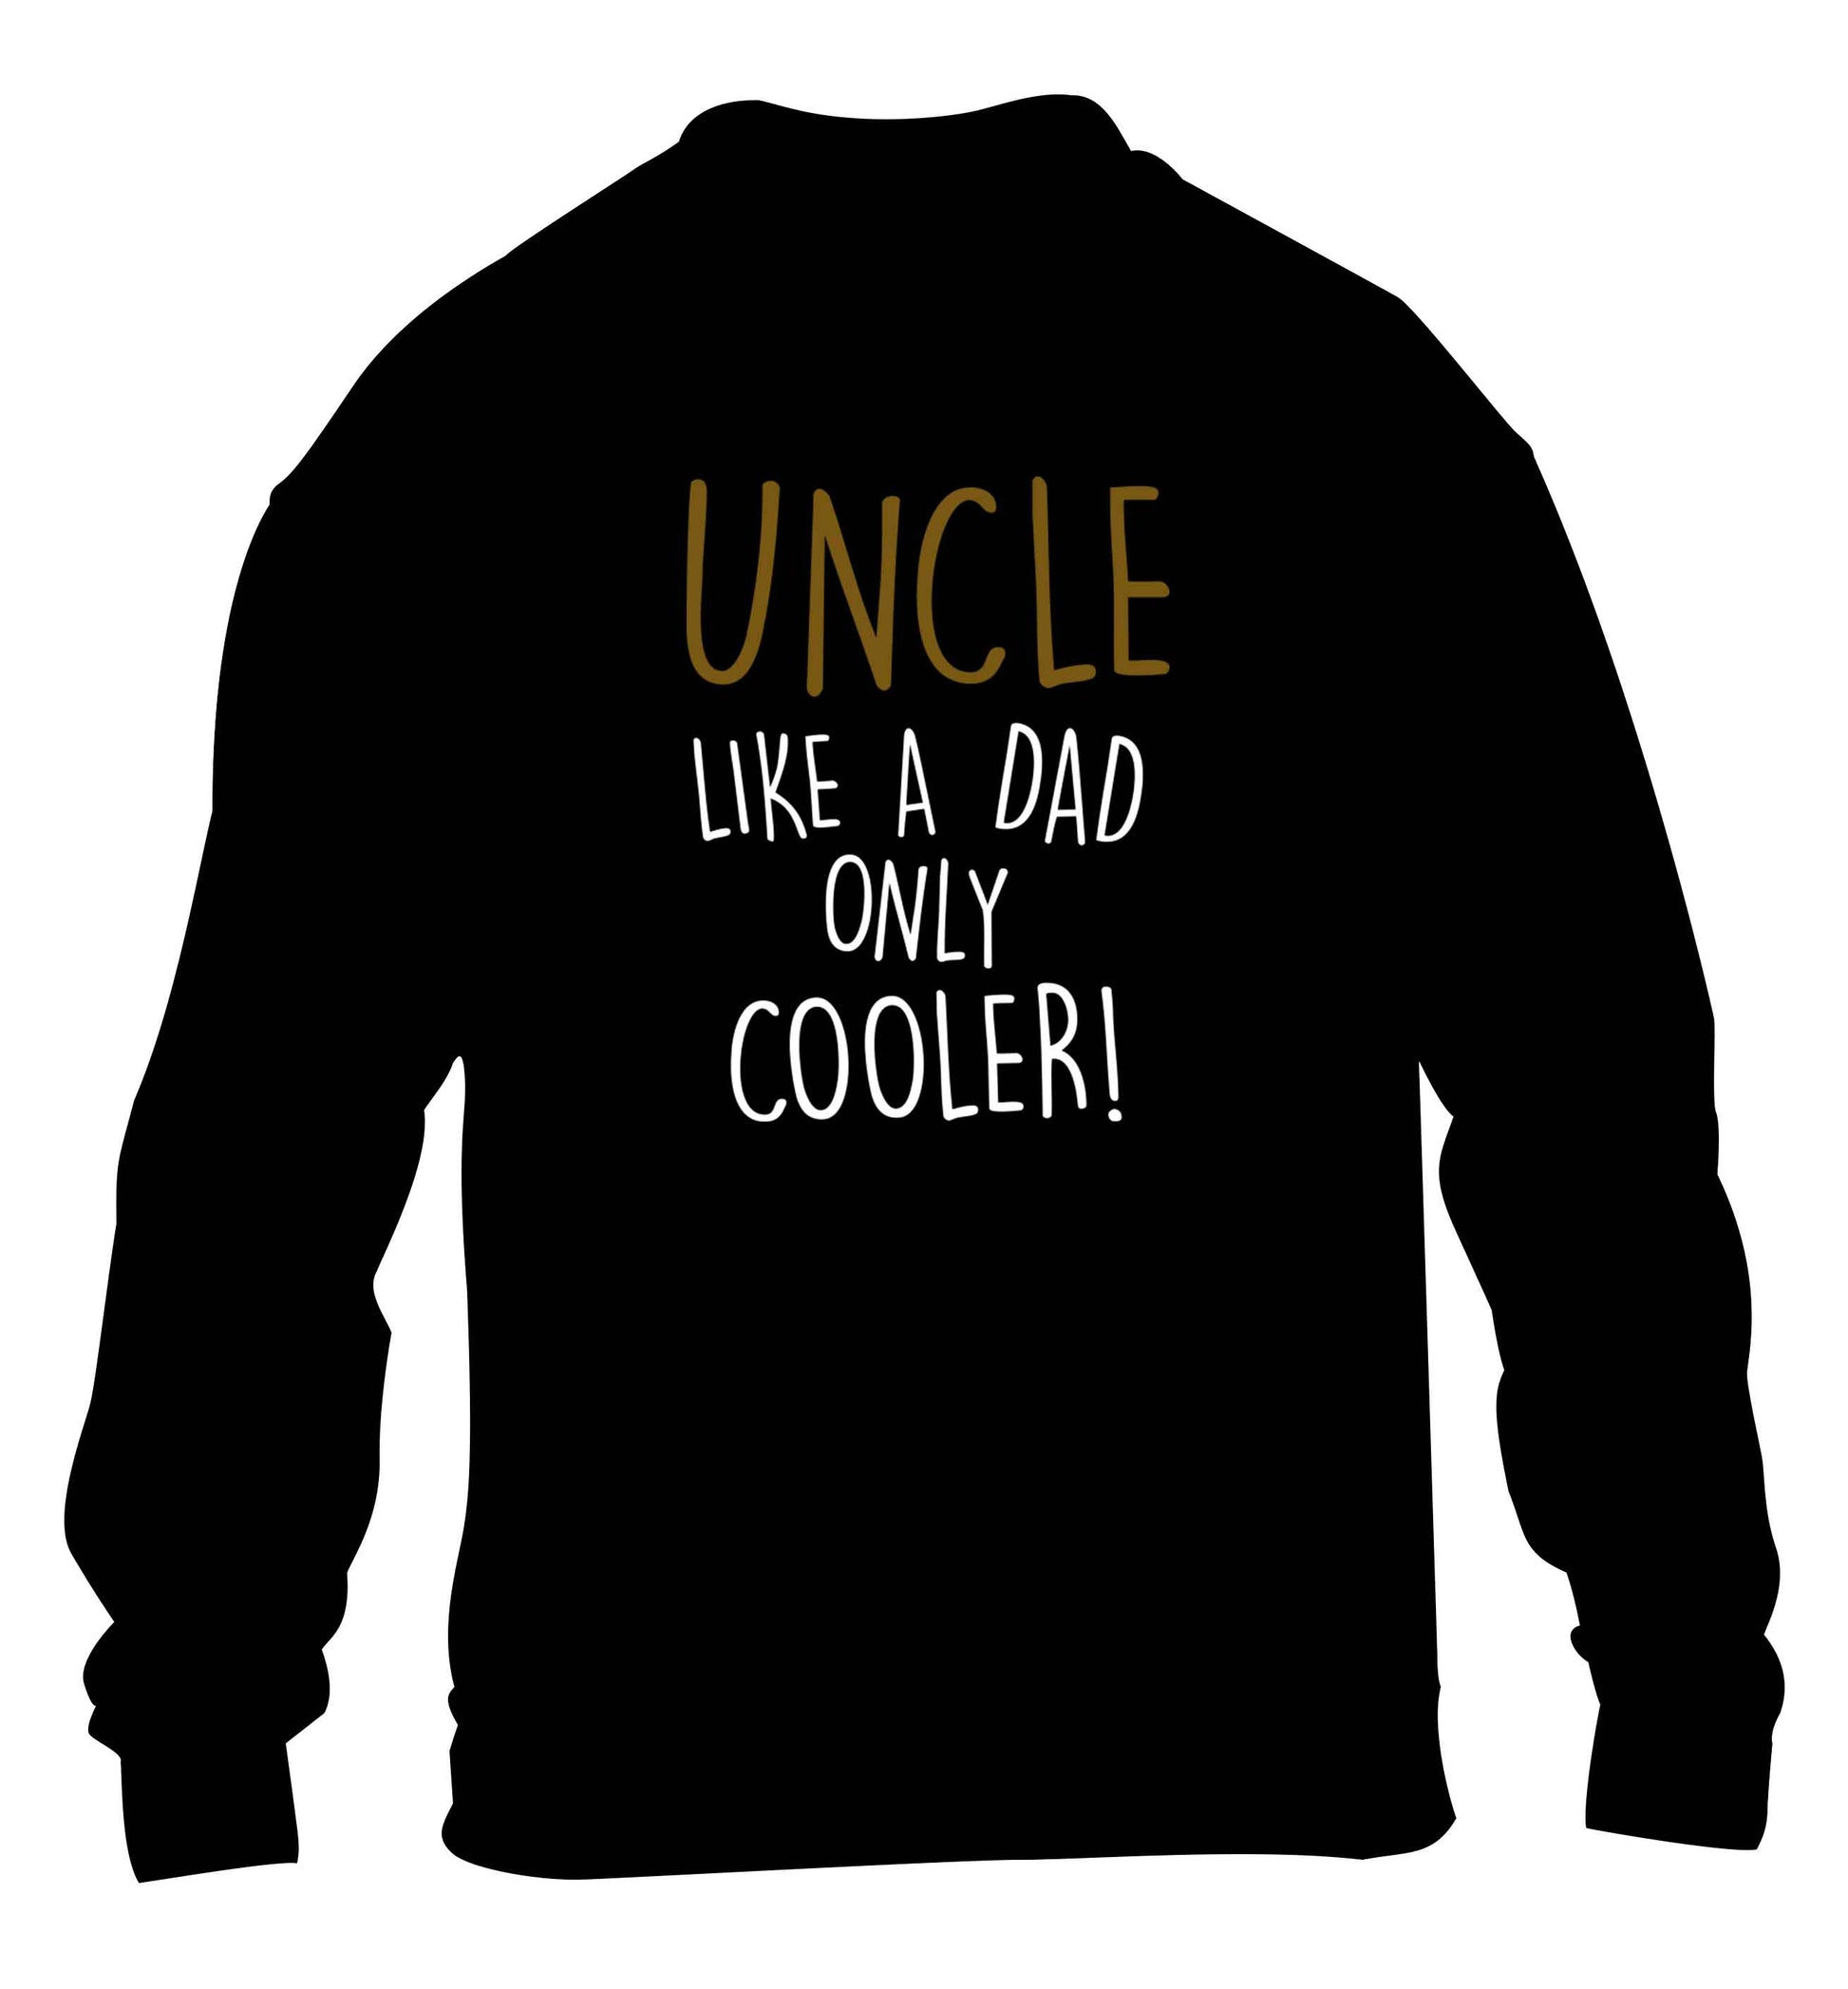 Uncle like a dad only cooler children's black sweater 12-13 Years